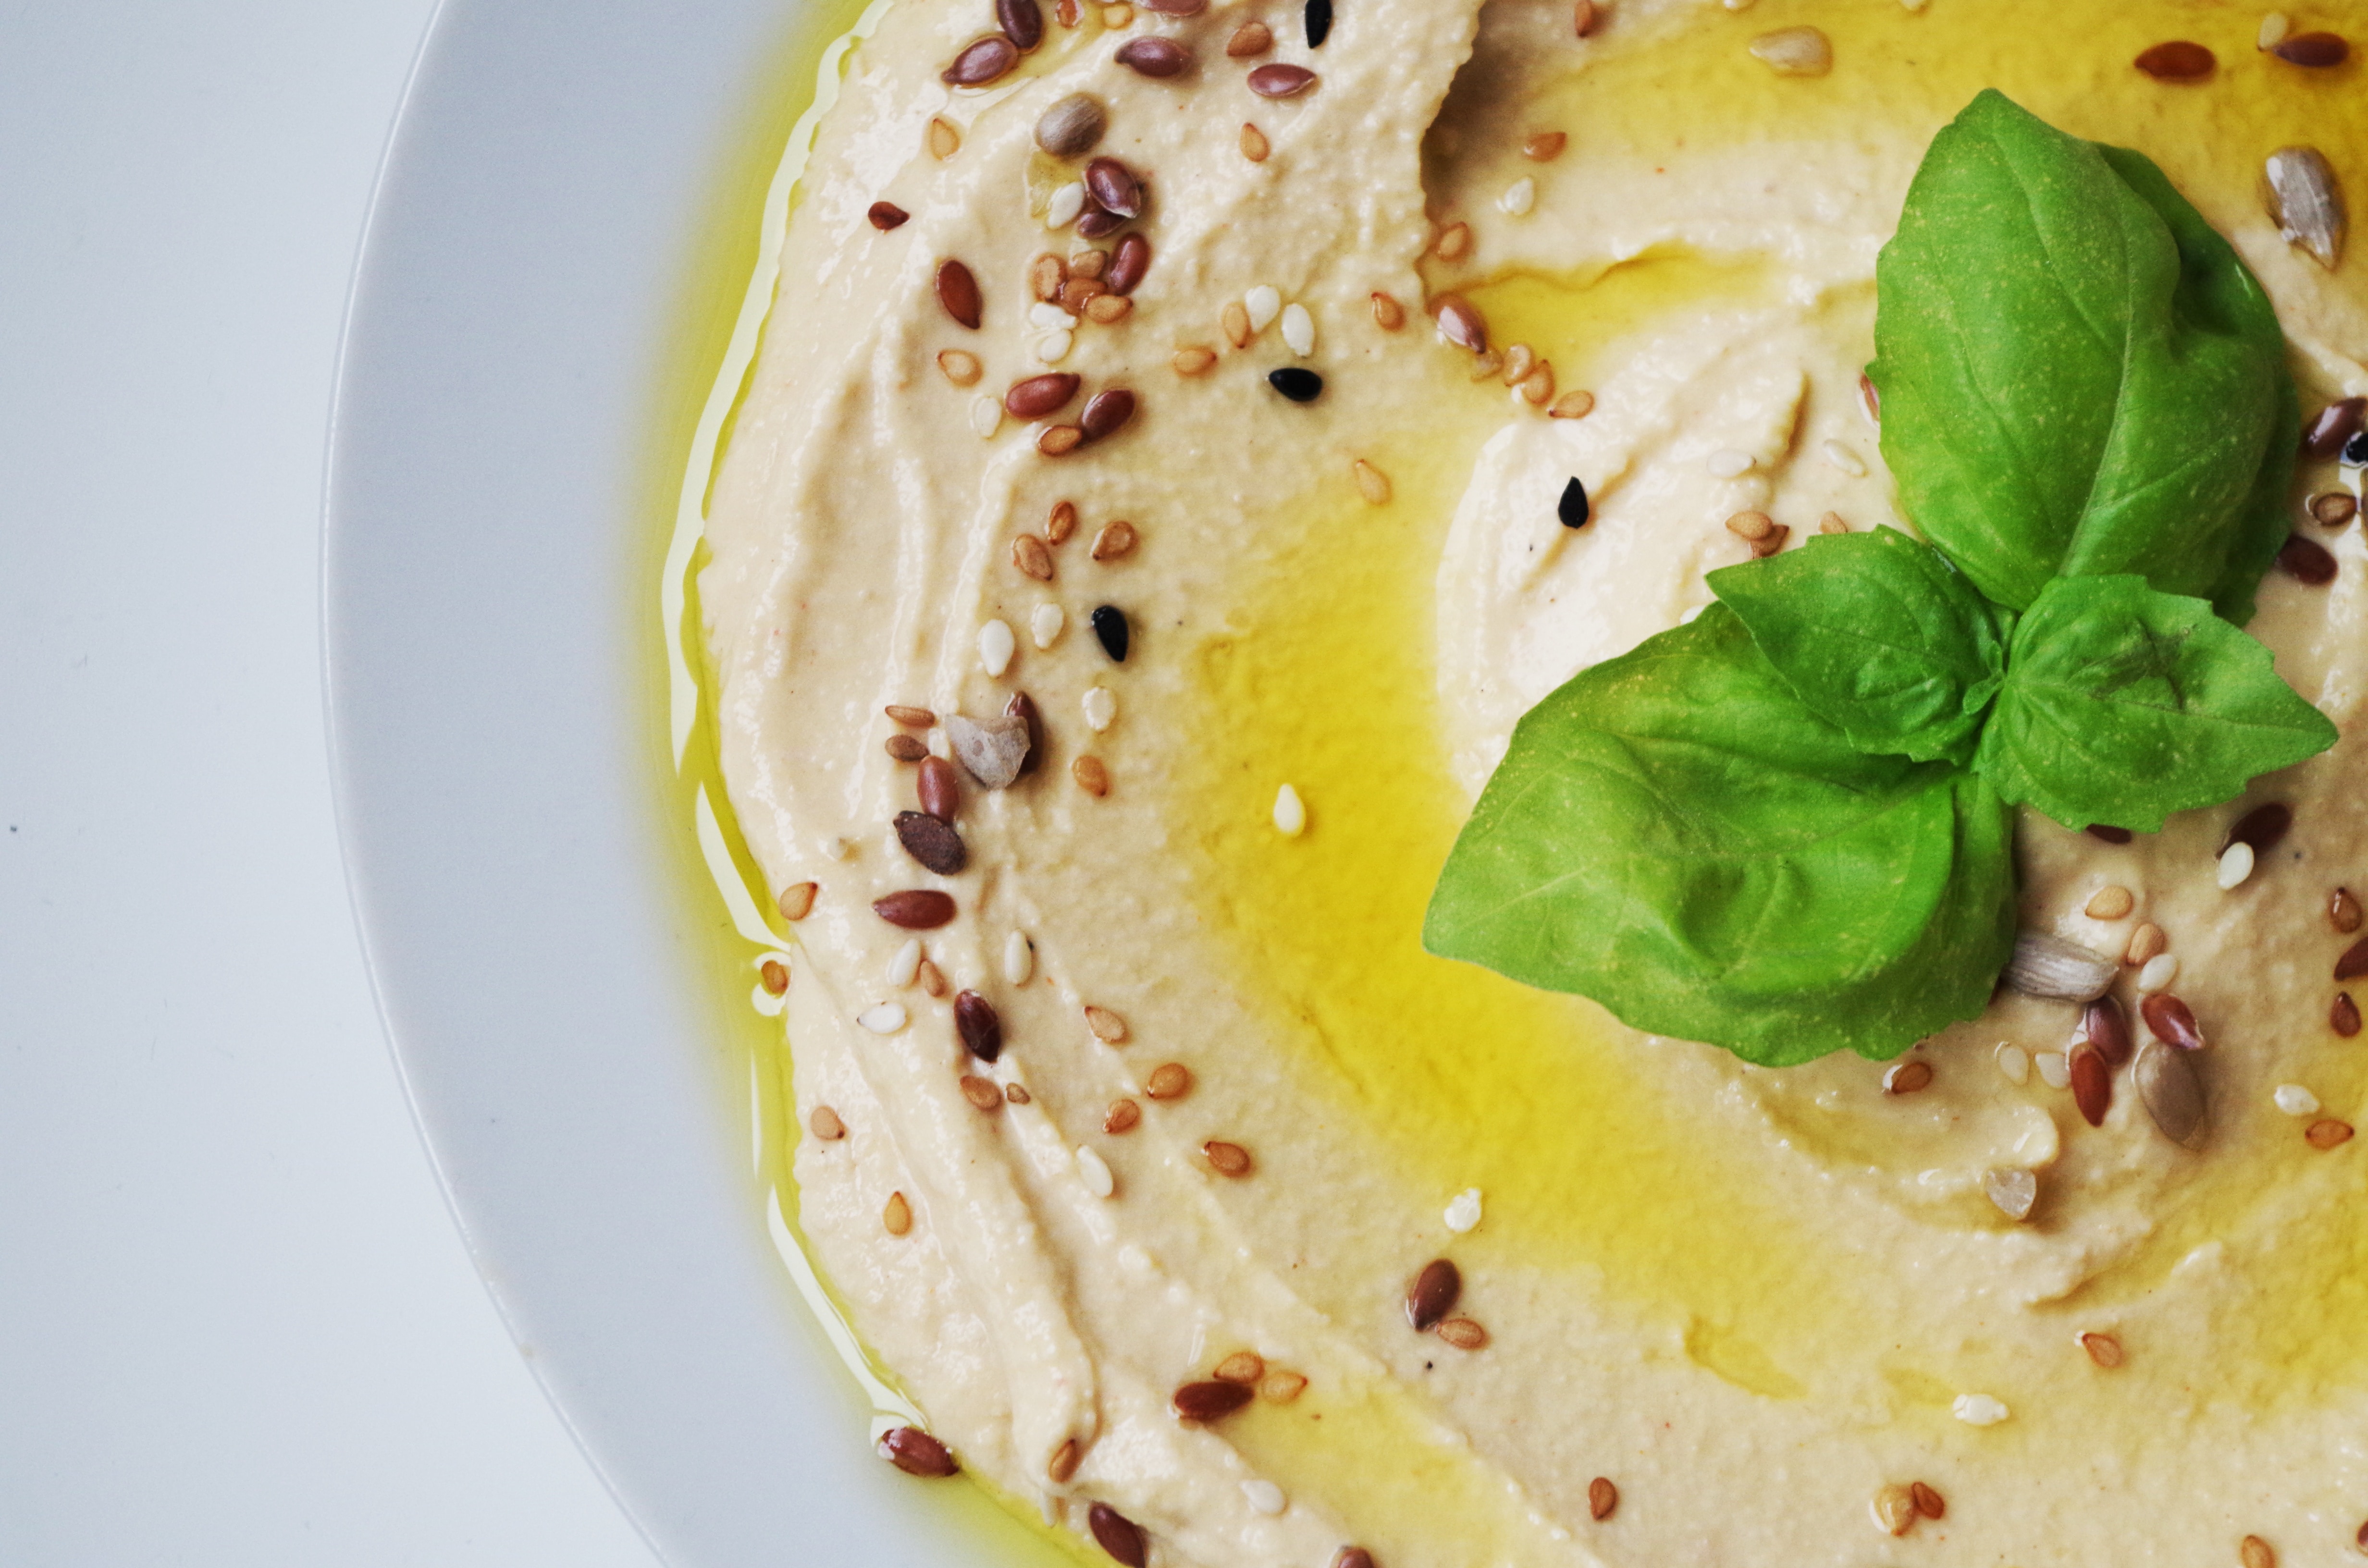 Hummus, Chickpeas, Seeds, Meal, Paste, food and drink, mint leaf - culinary